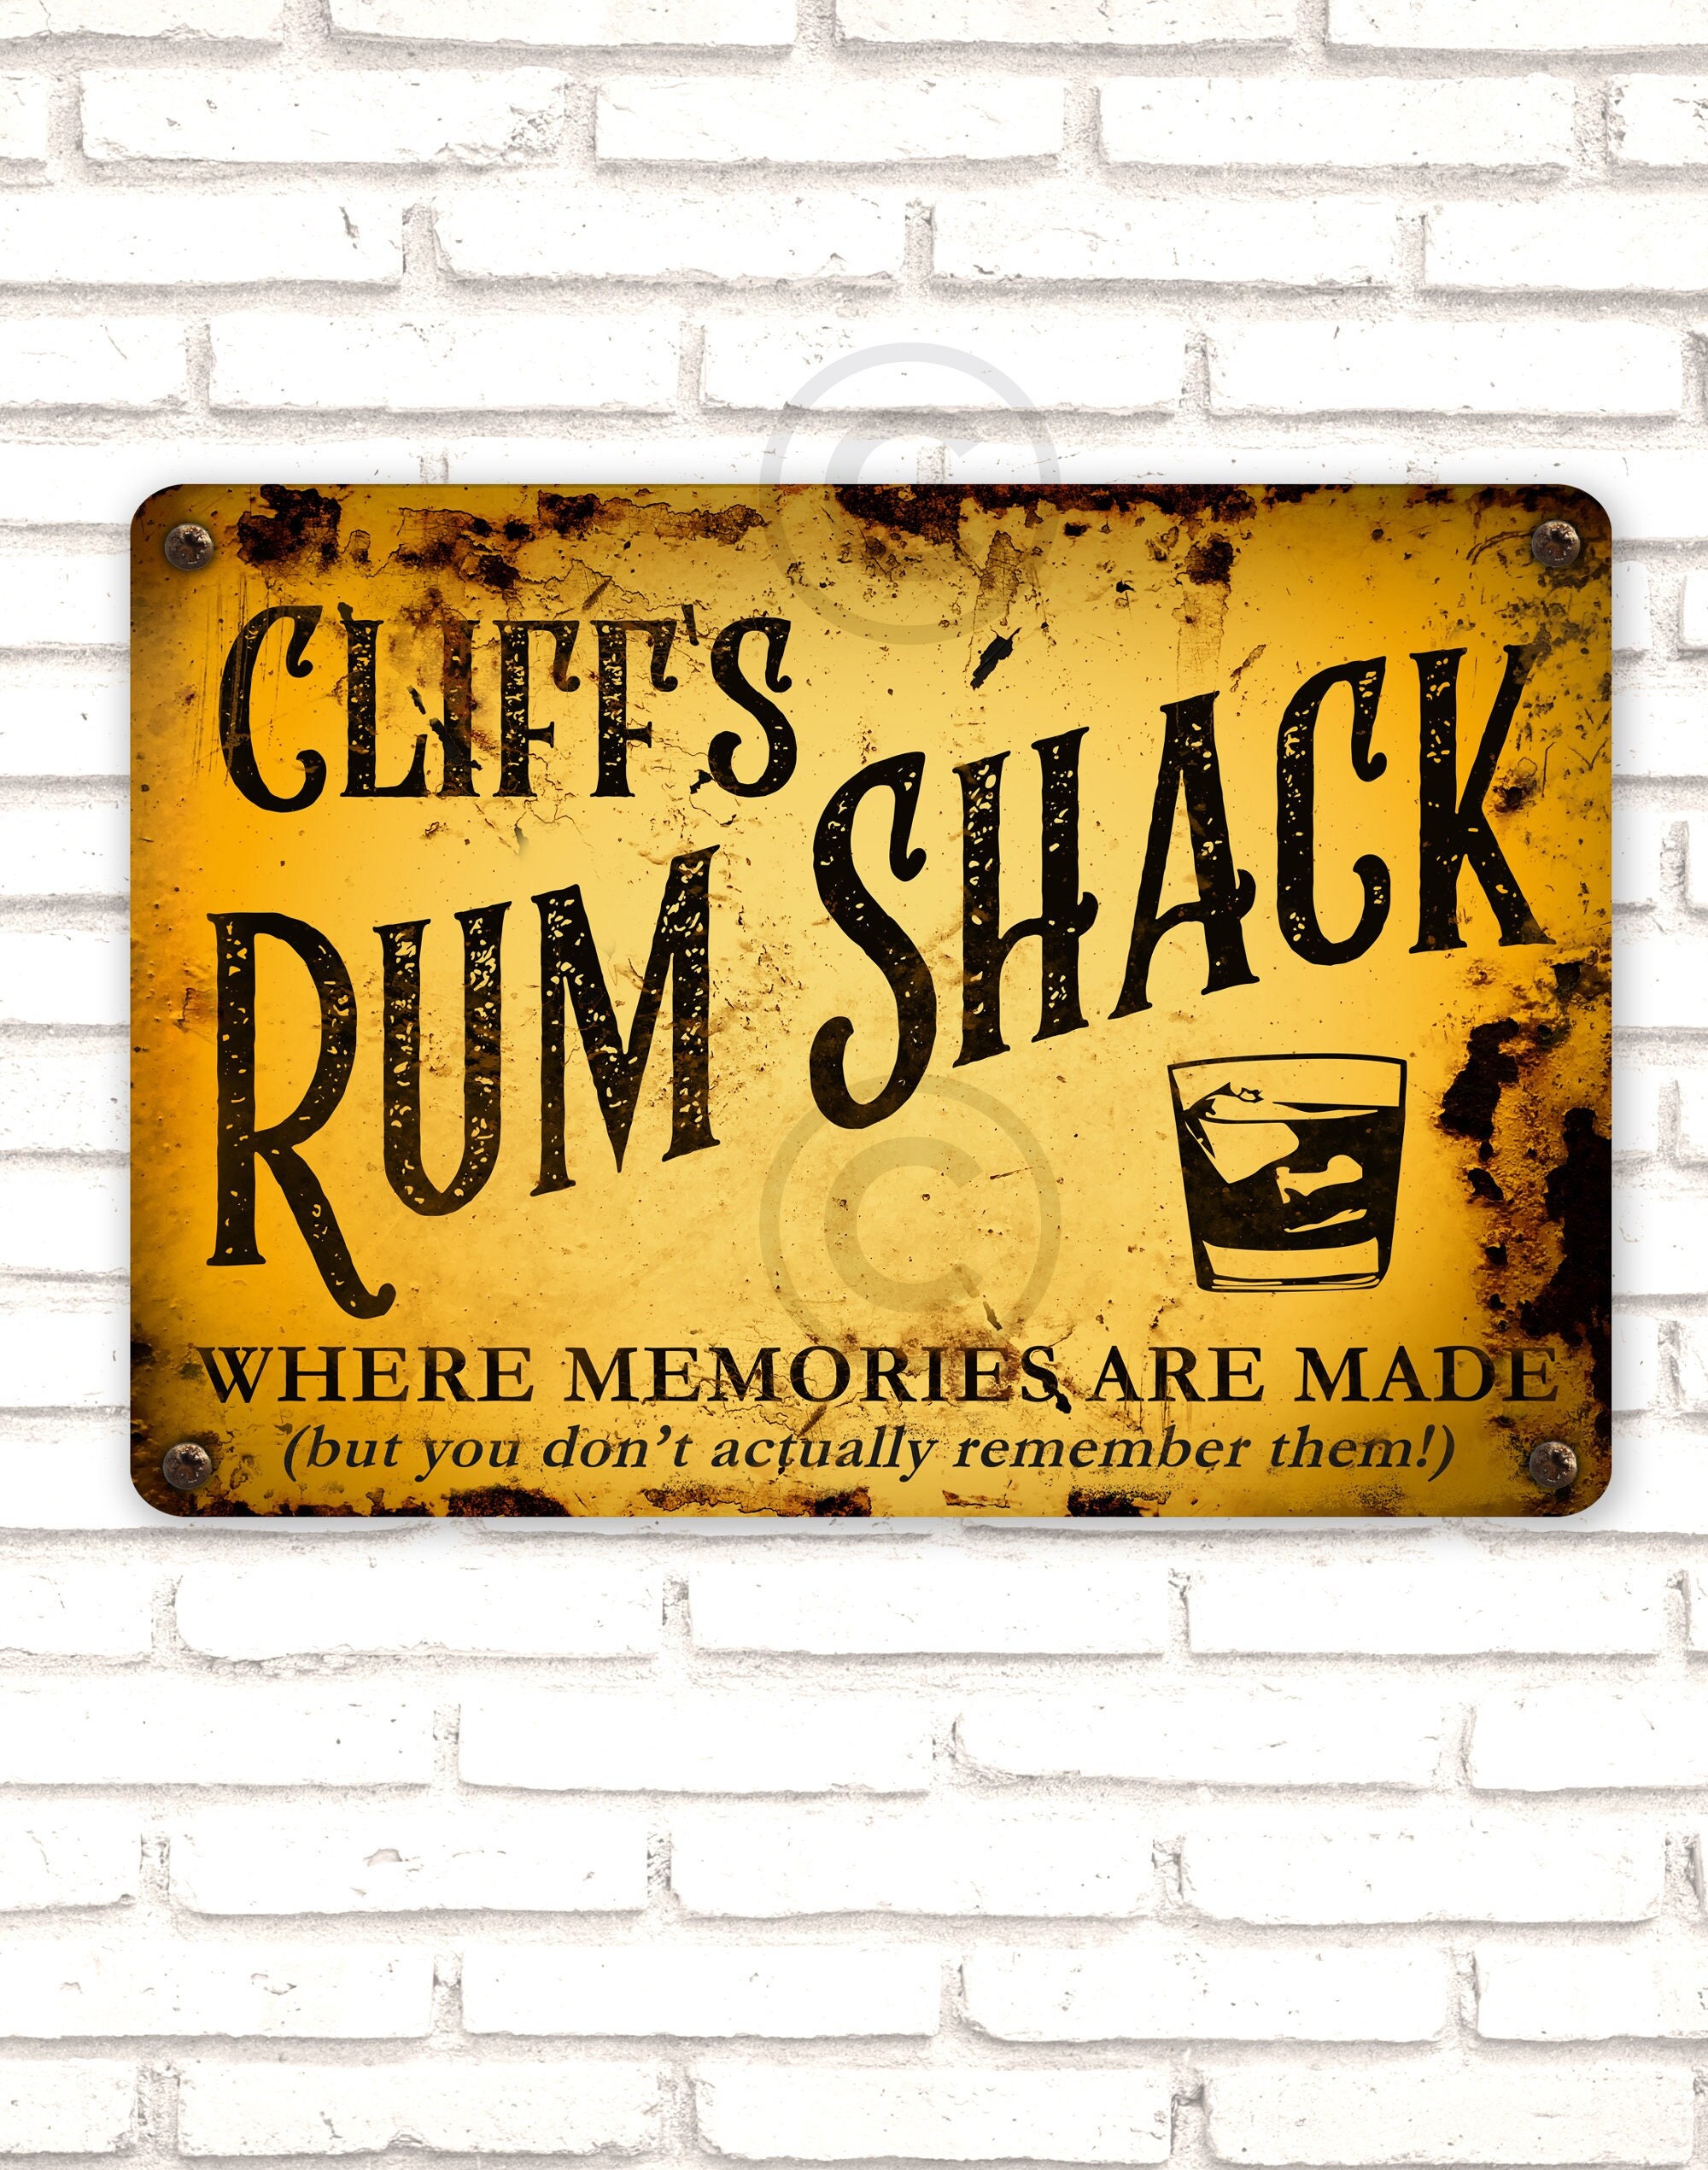 Don Papa Rum Advert Aged Look Vintage Retro Style Metal Sign Plaque